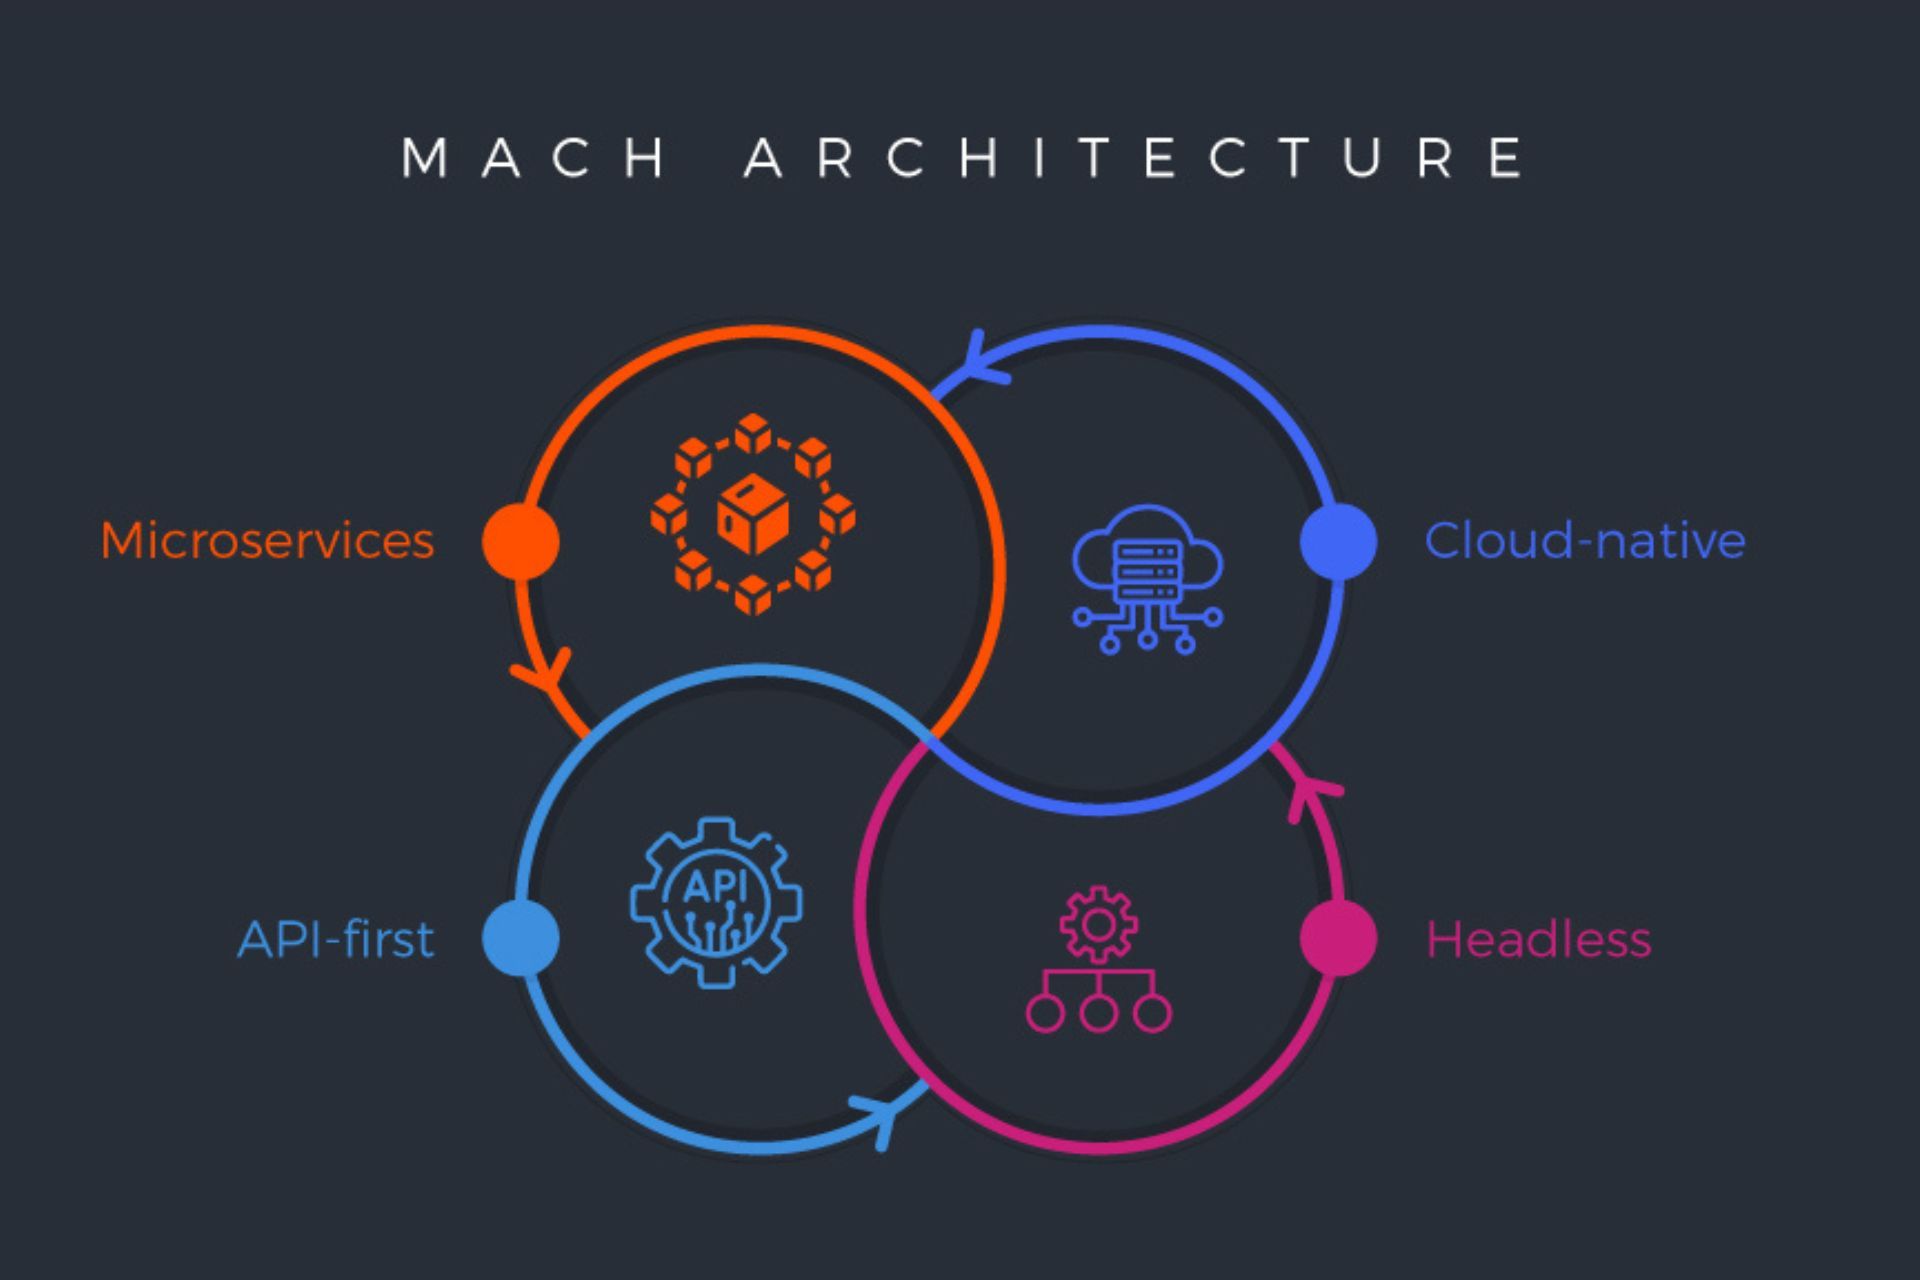 MACH Architecture and Why it Matters?